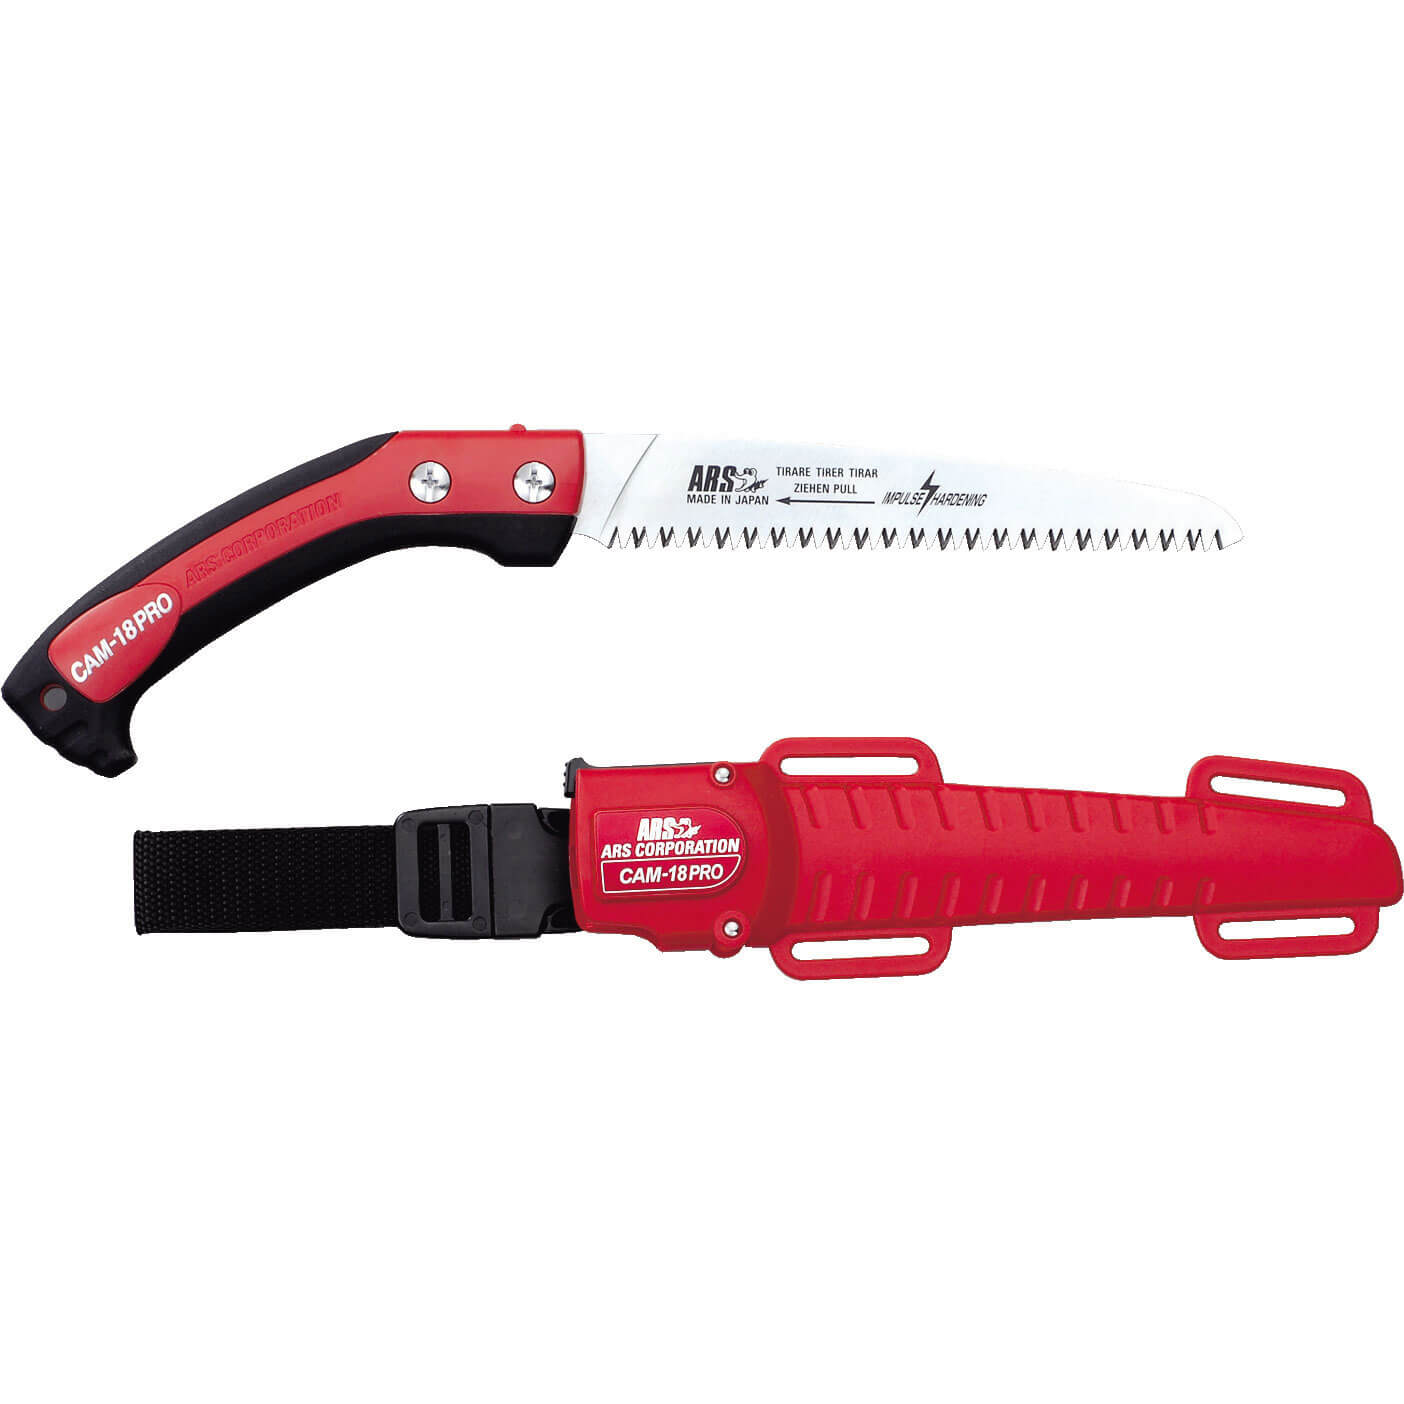 ARS Professional Pruning Saw Straight Blade 180mm